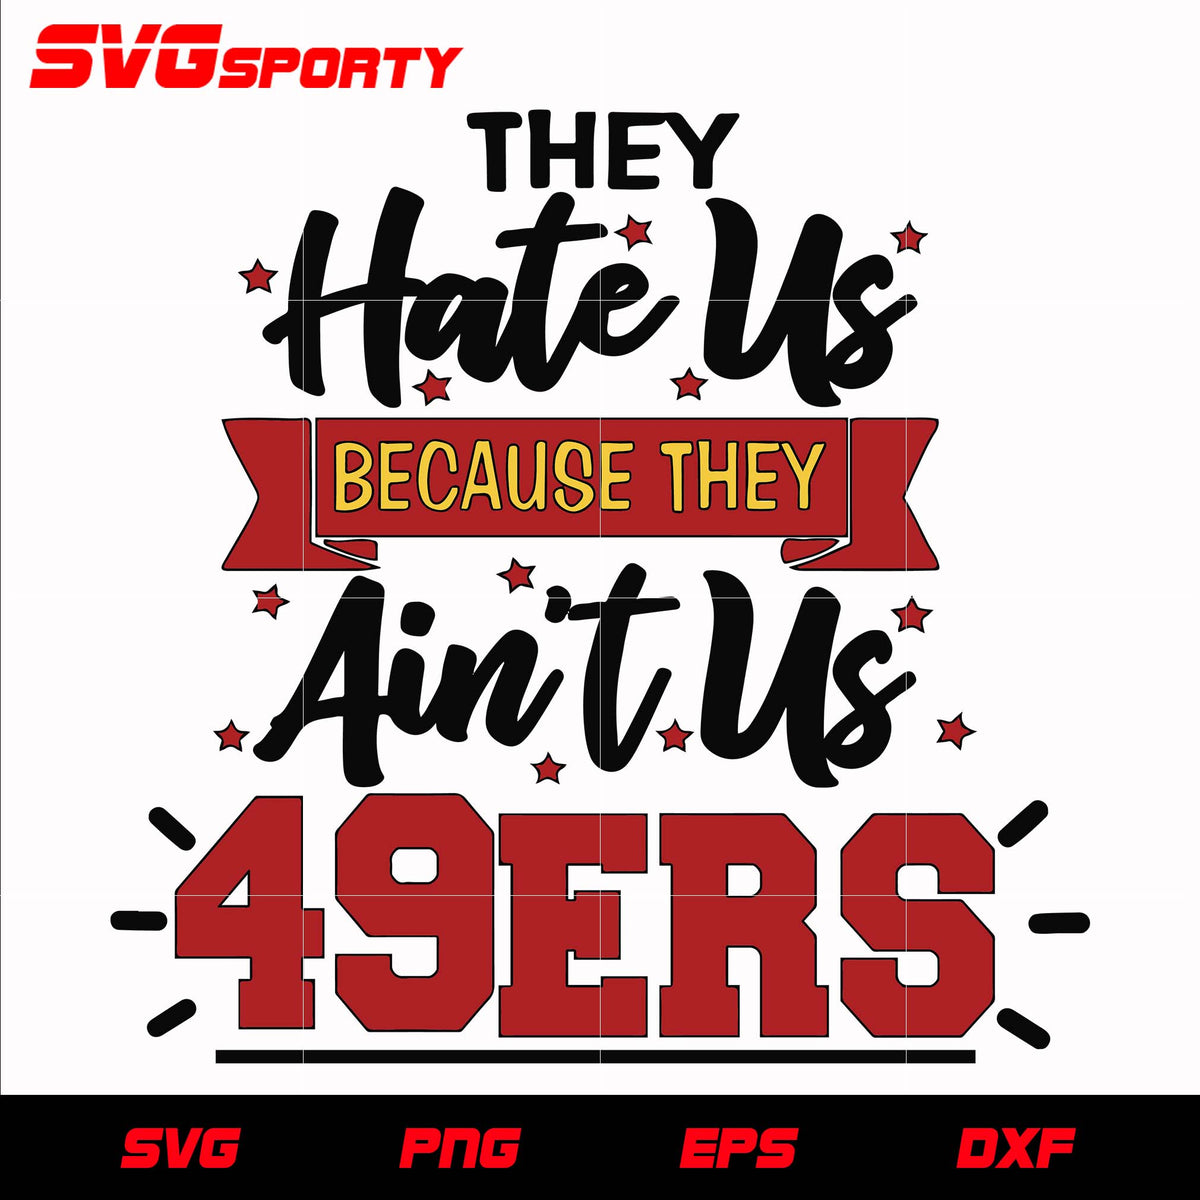 They Hate Us Cuz They Ain't Us - SVG, PNG